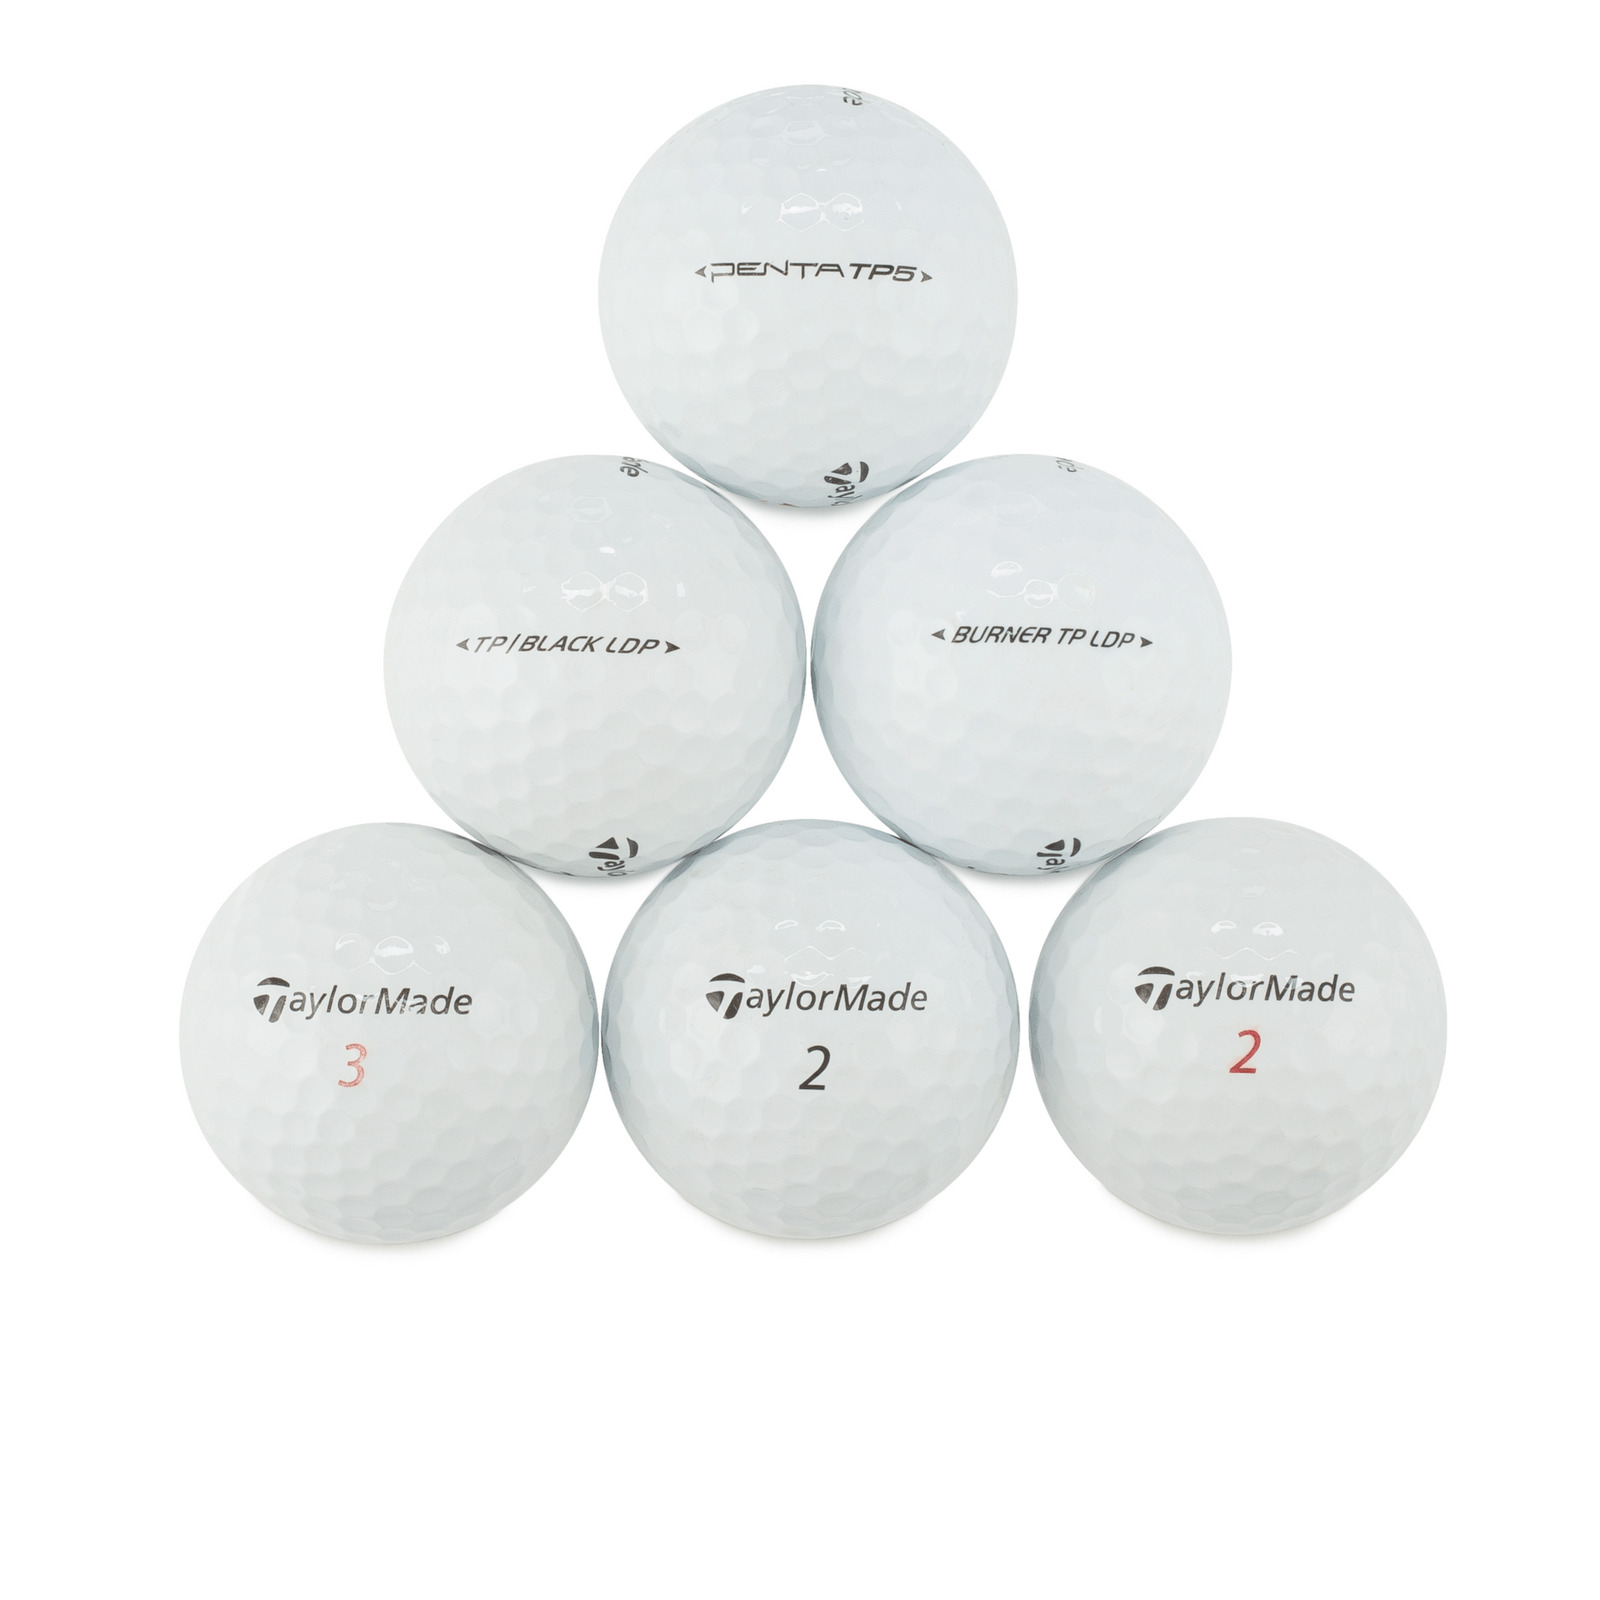 TaylorMade Penta TP Mix Grade AAA Recycled Used Golf Balls, White - 48 Count